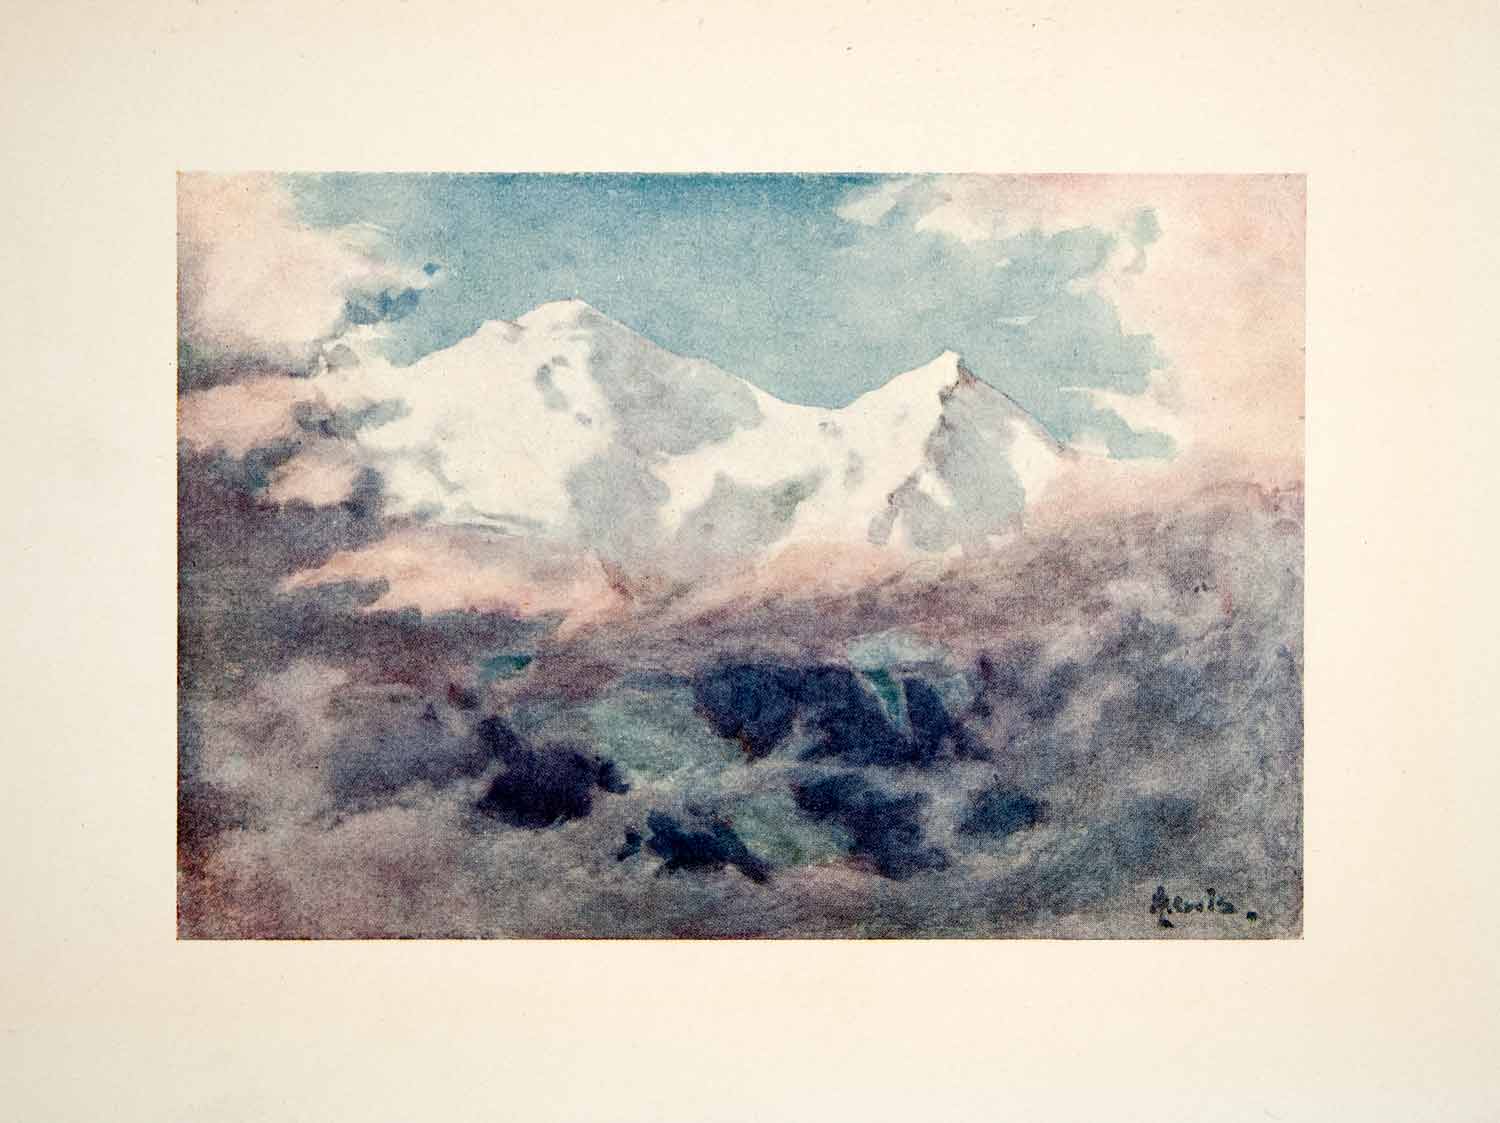 1908 Color Print Aiguille Dome du Gouter Mont Blanc France May Hardwicke XGPB2